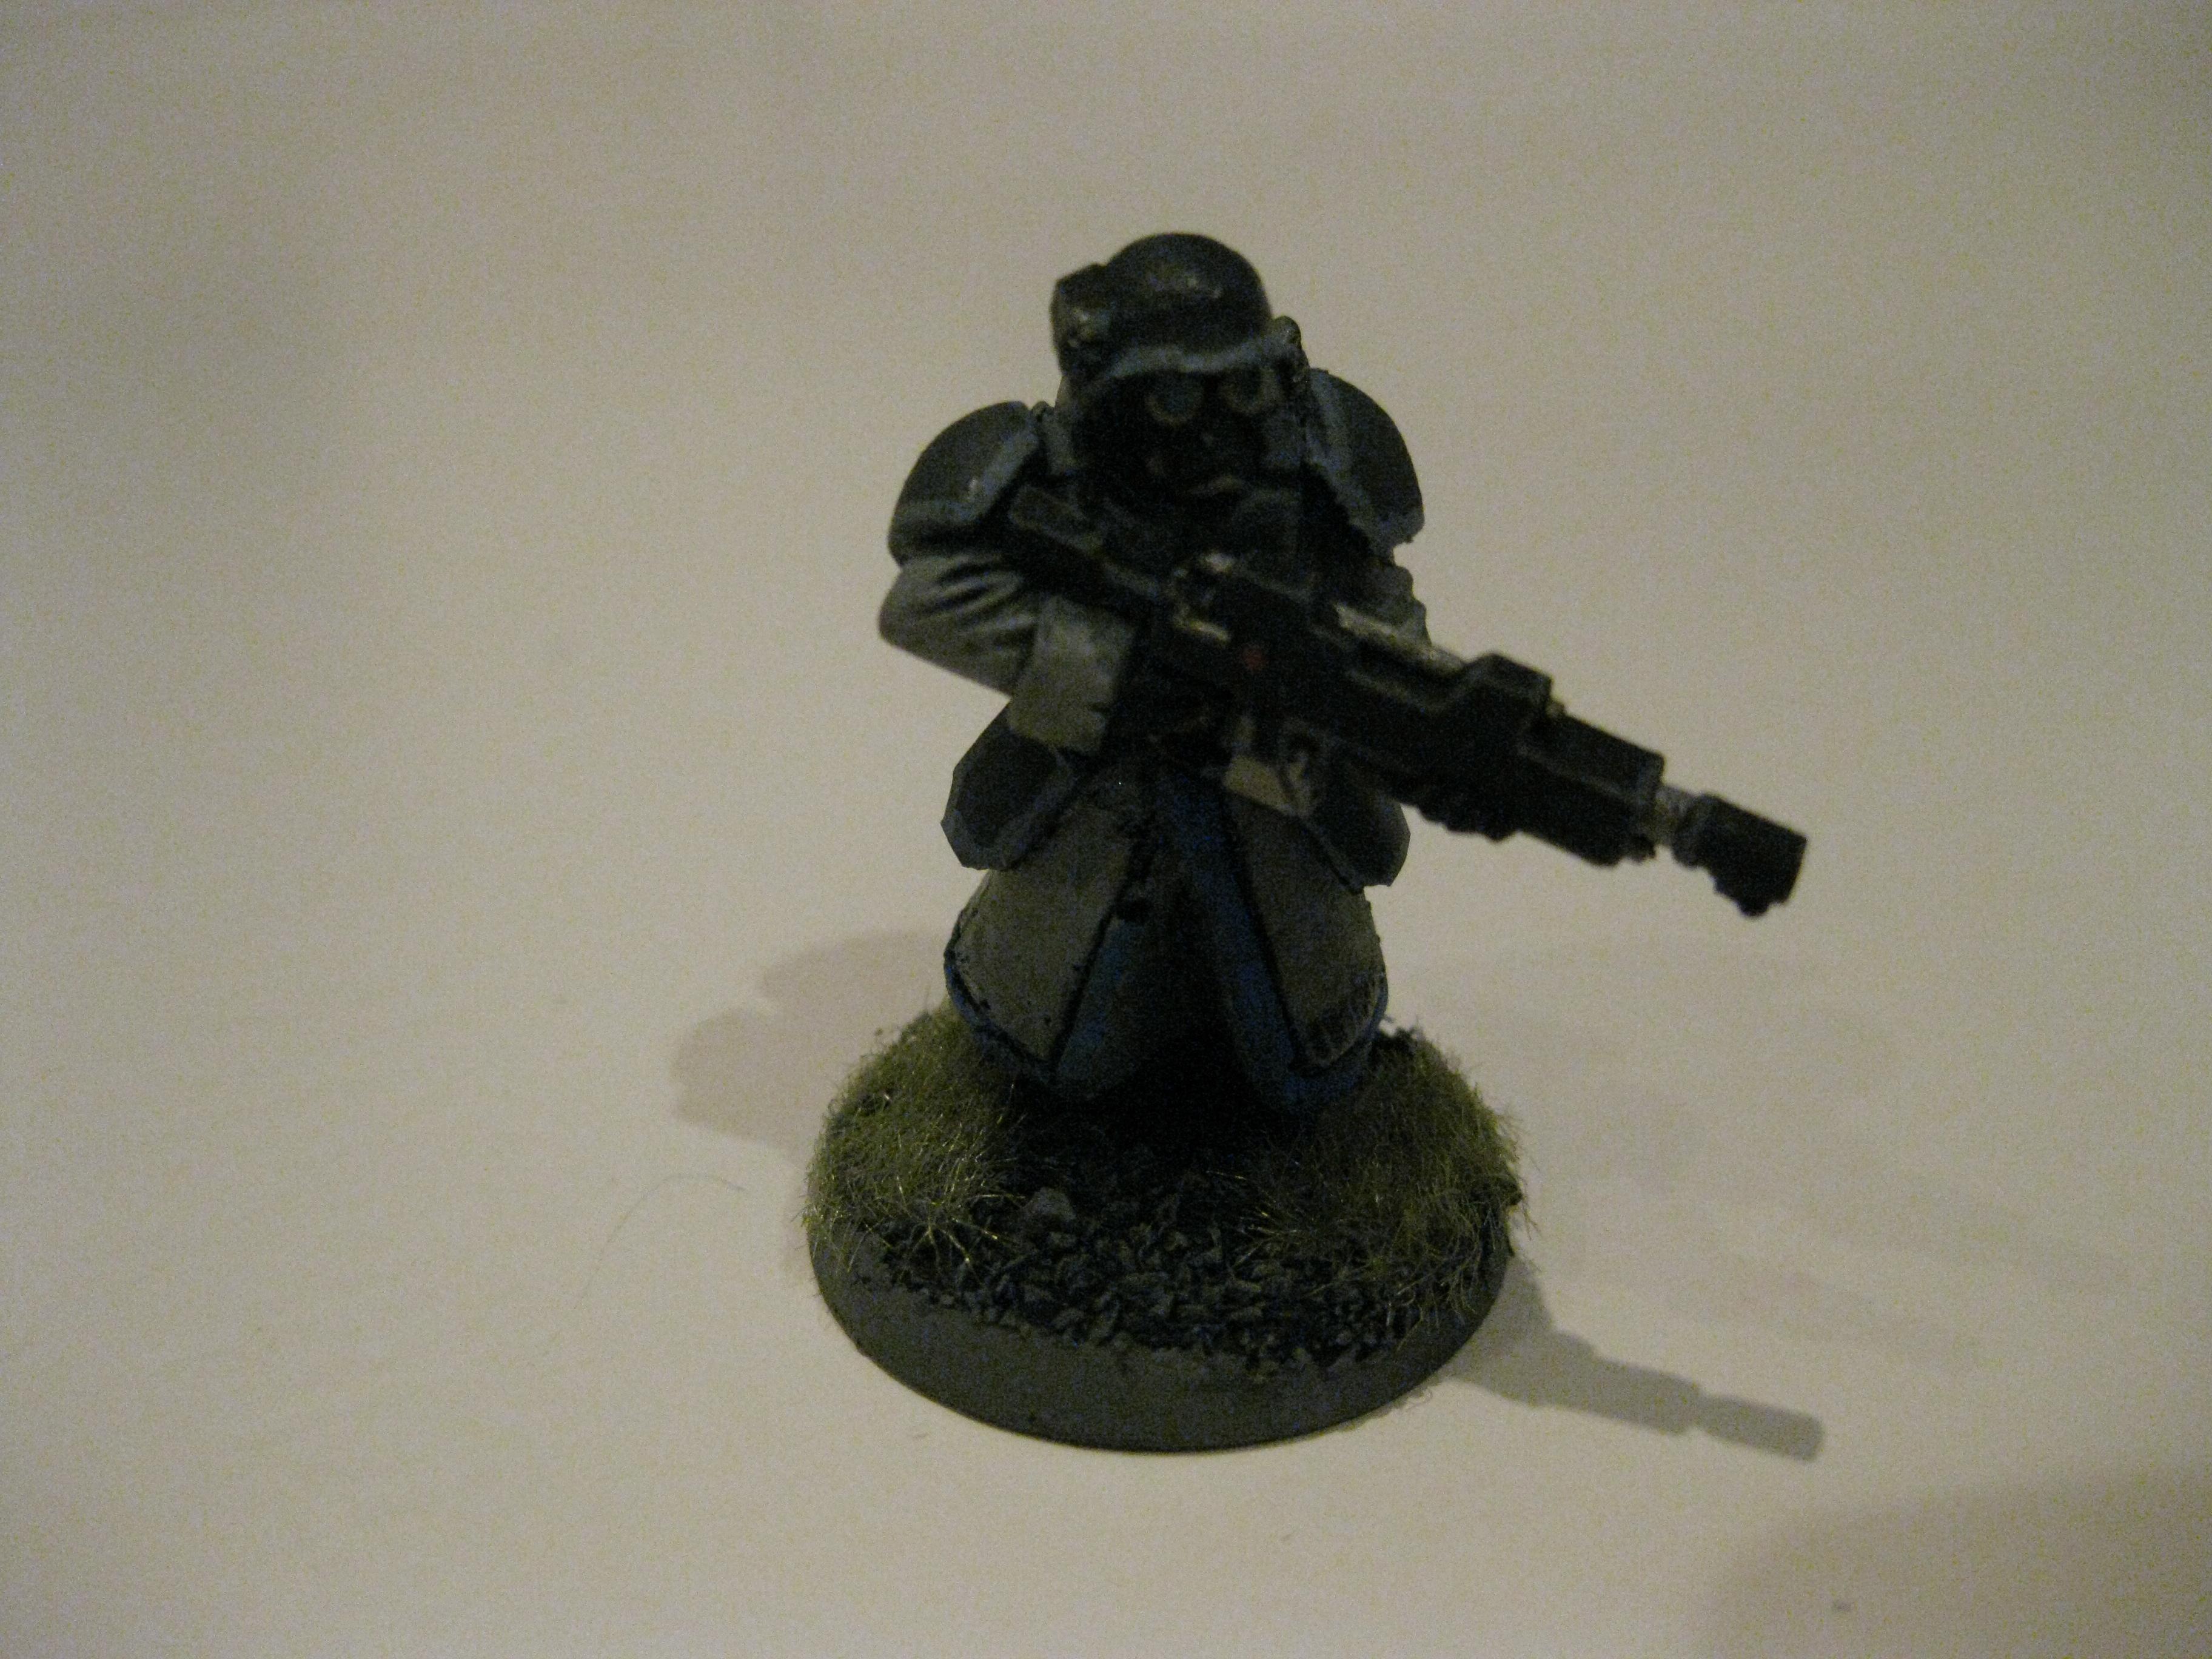 Greatcoat, Imperial Guard, Warhammer 40,000